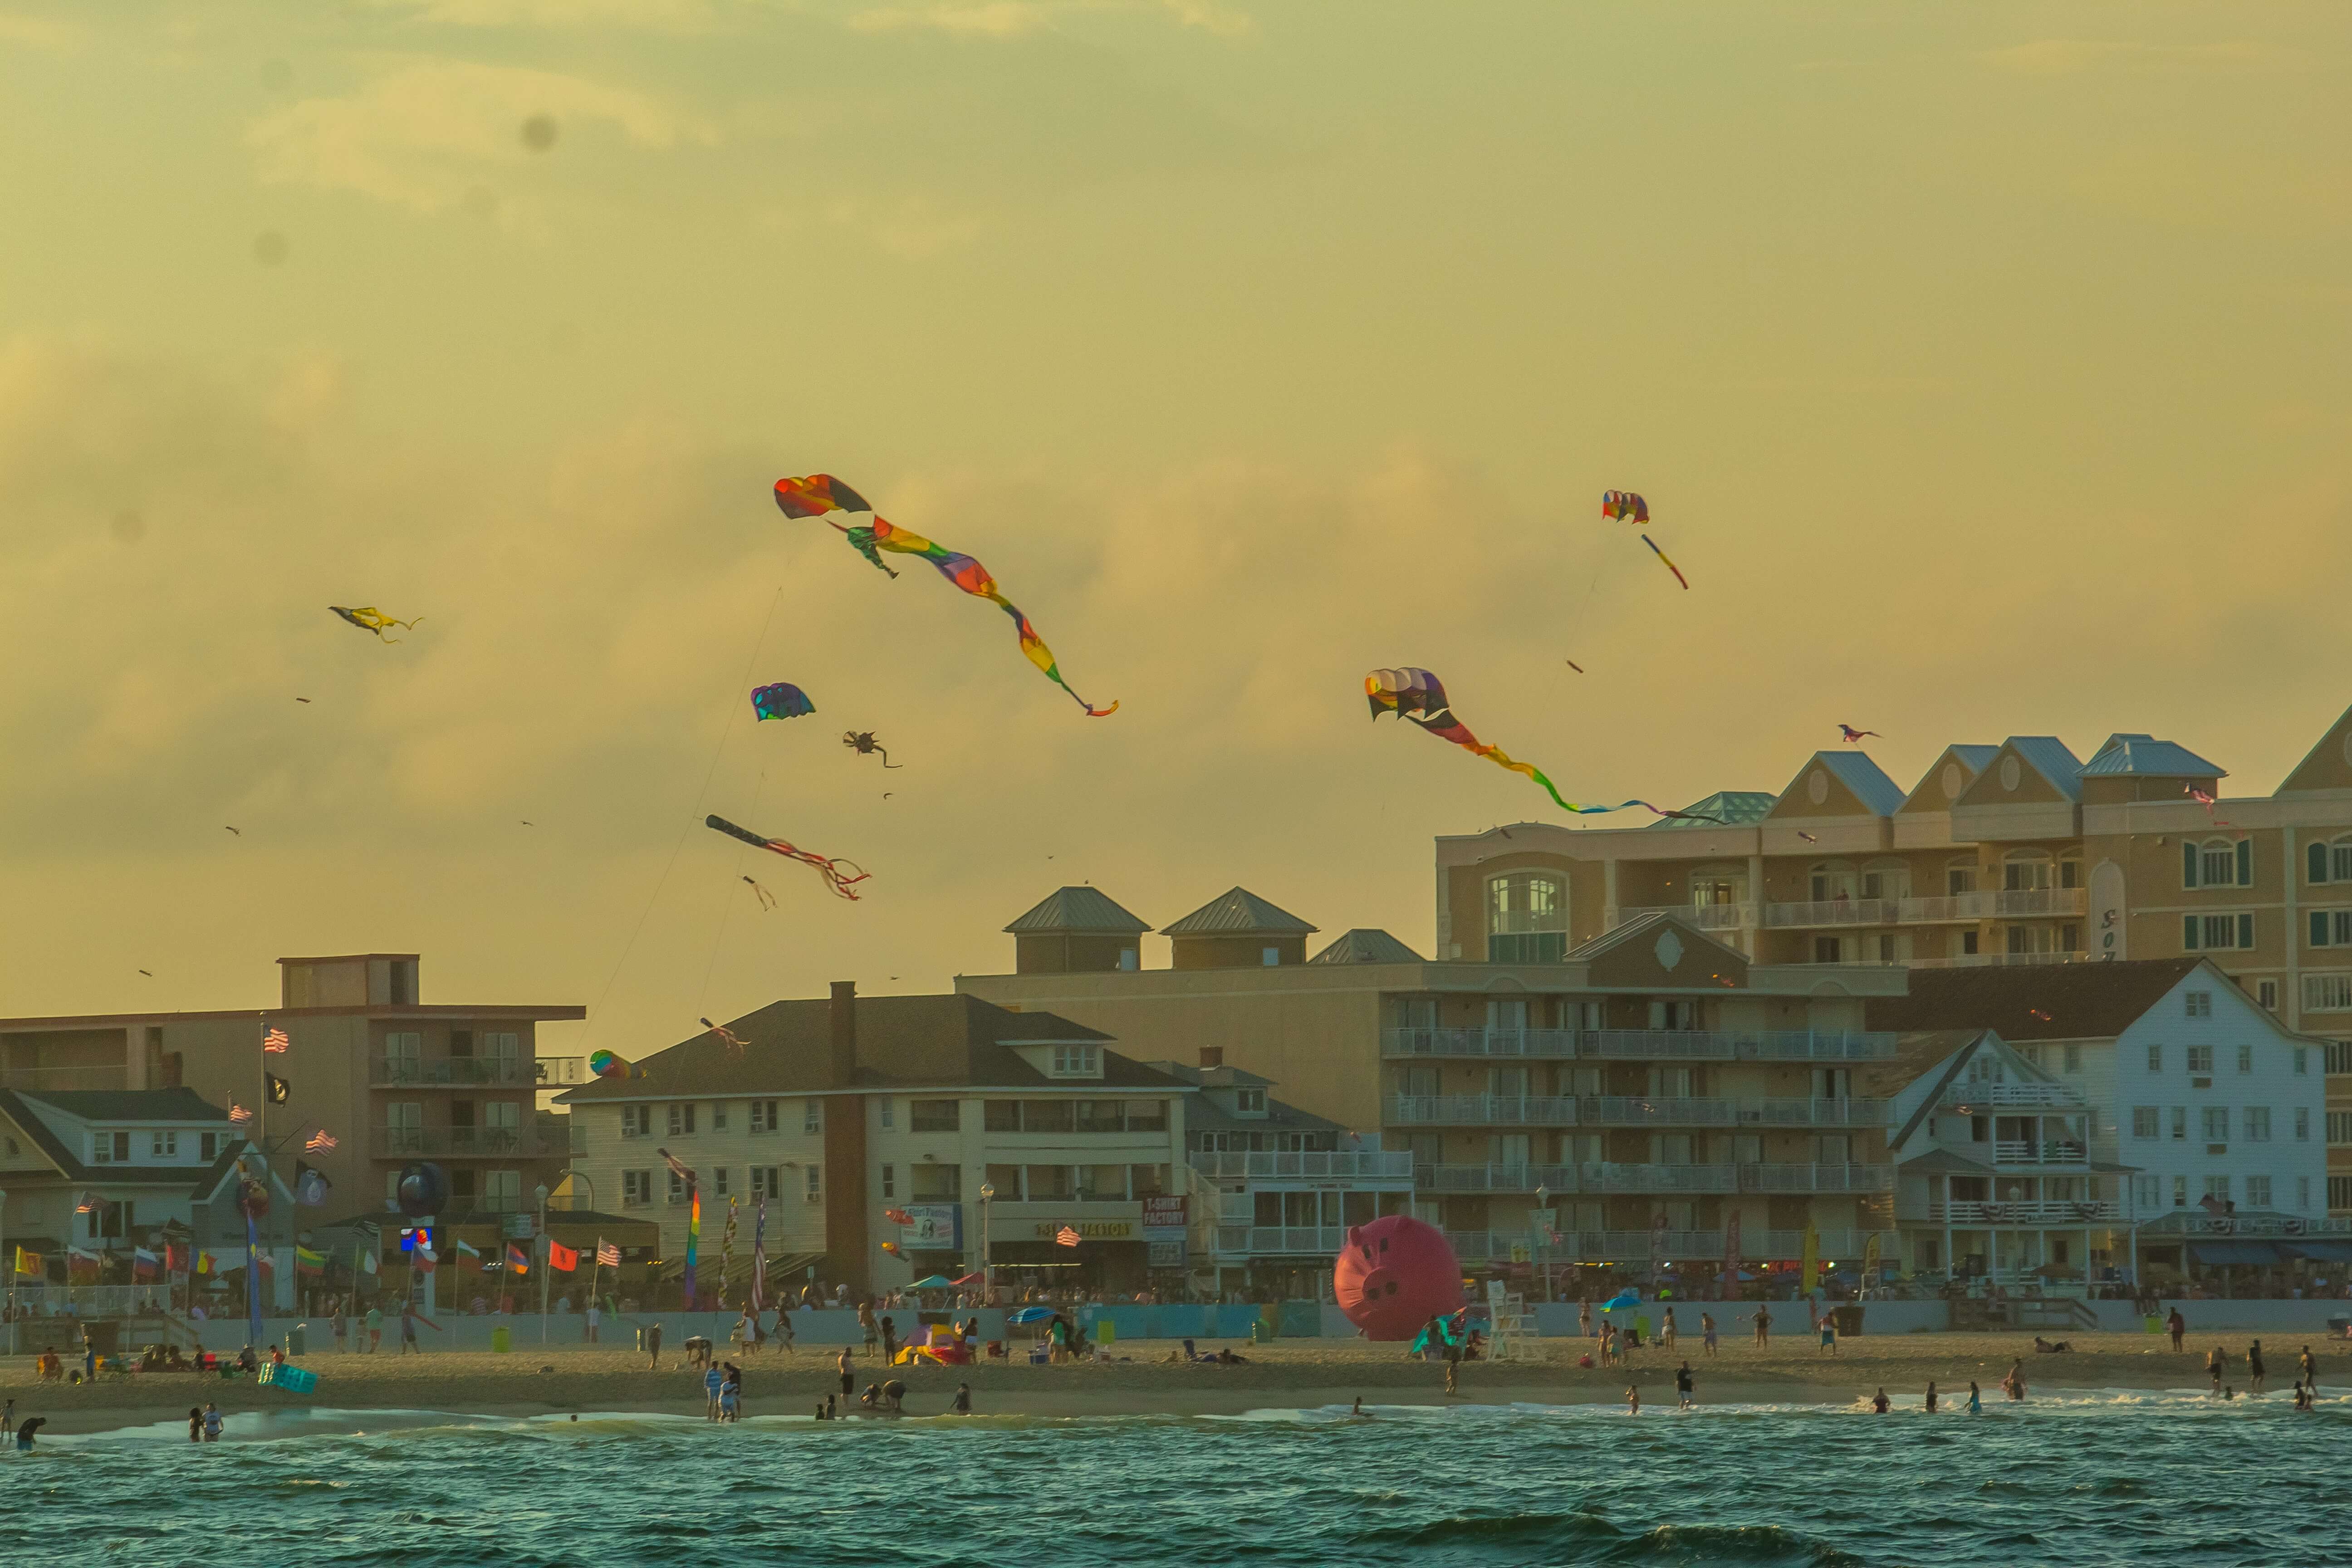 kites flying over a beach in Ocean City, Maryland